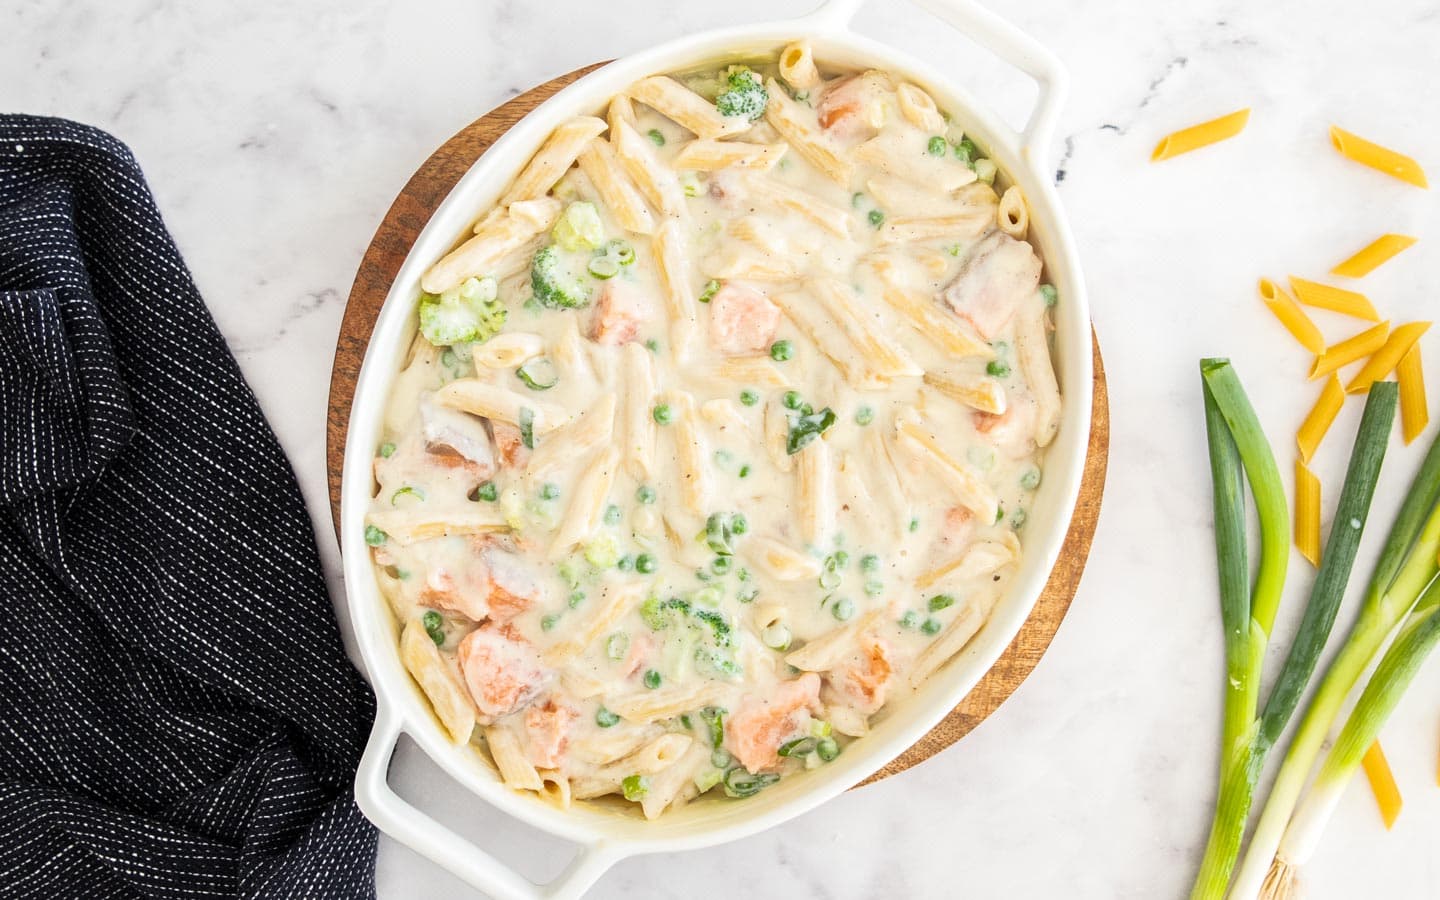 The salmon pasta in a baking dish.